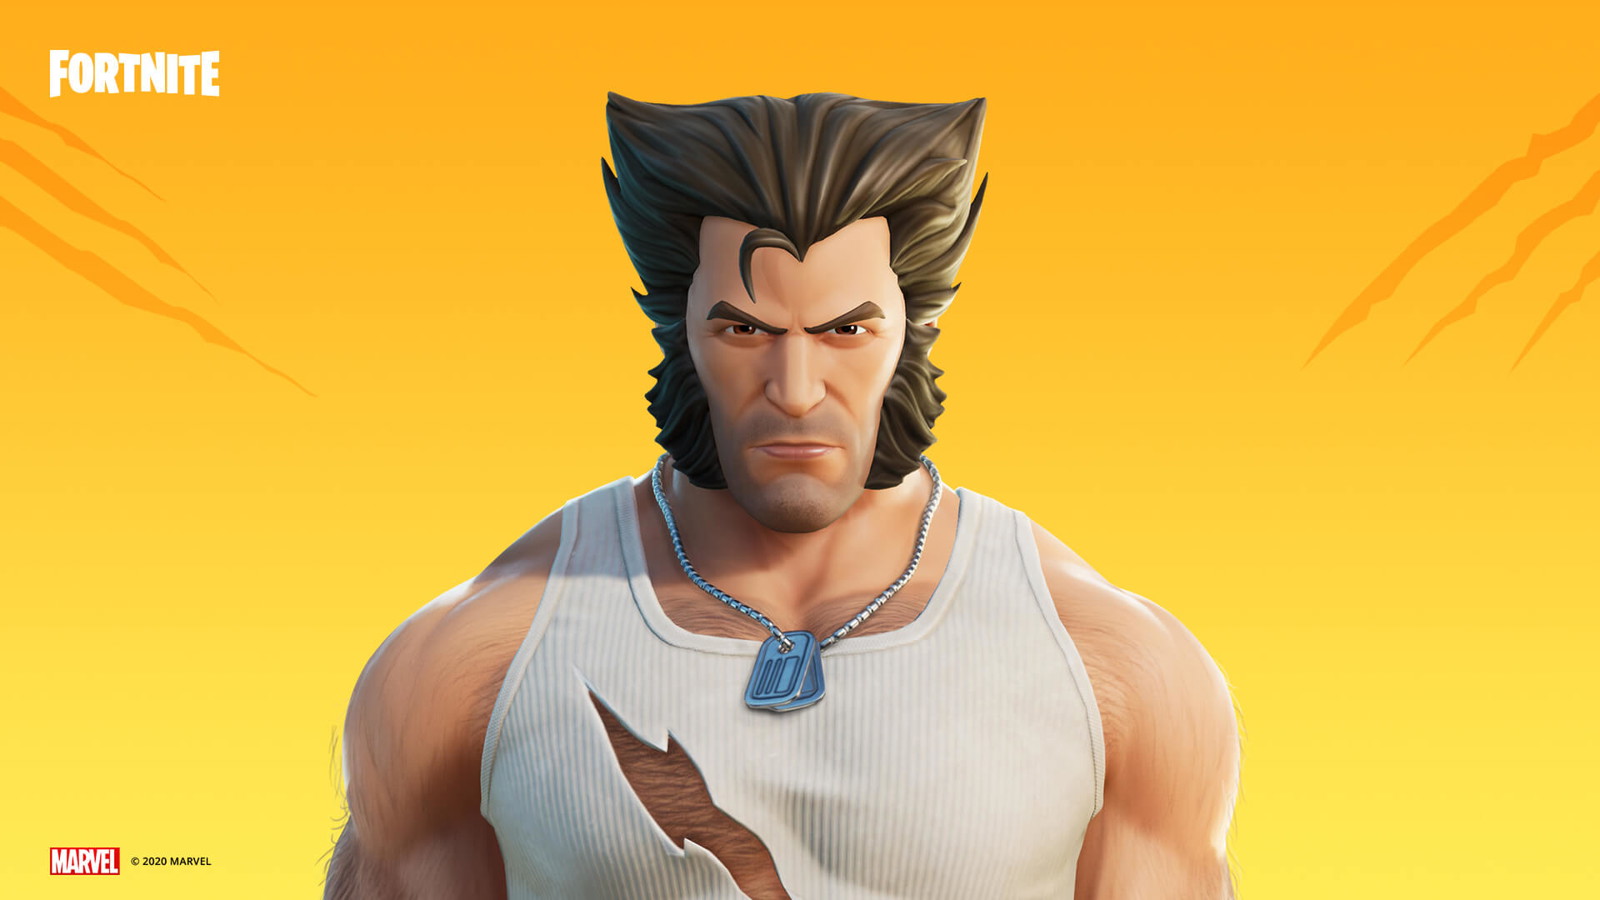 Logan and Wolverine have already been featured in Fortnite before, but the Old Man variation still has not.